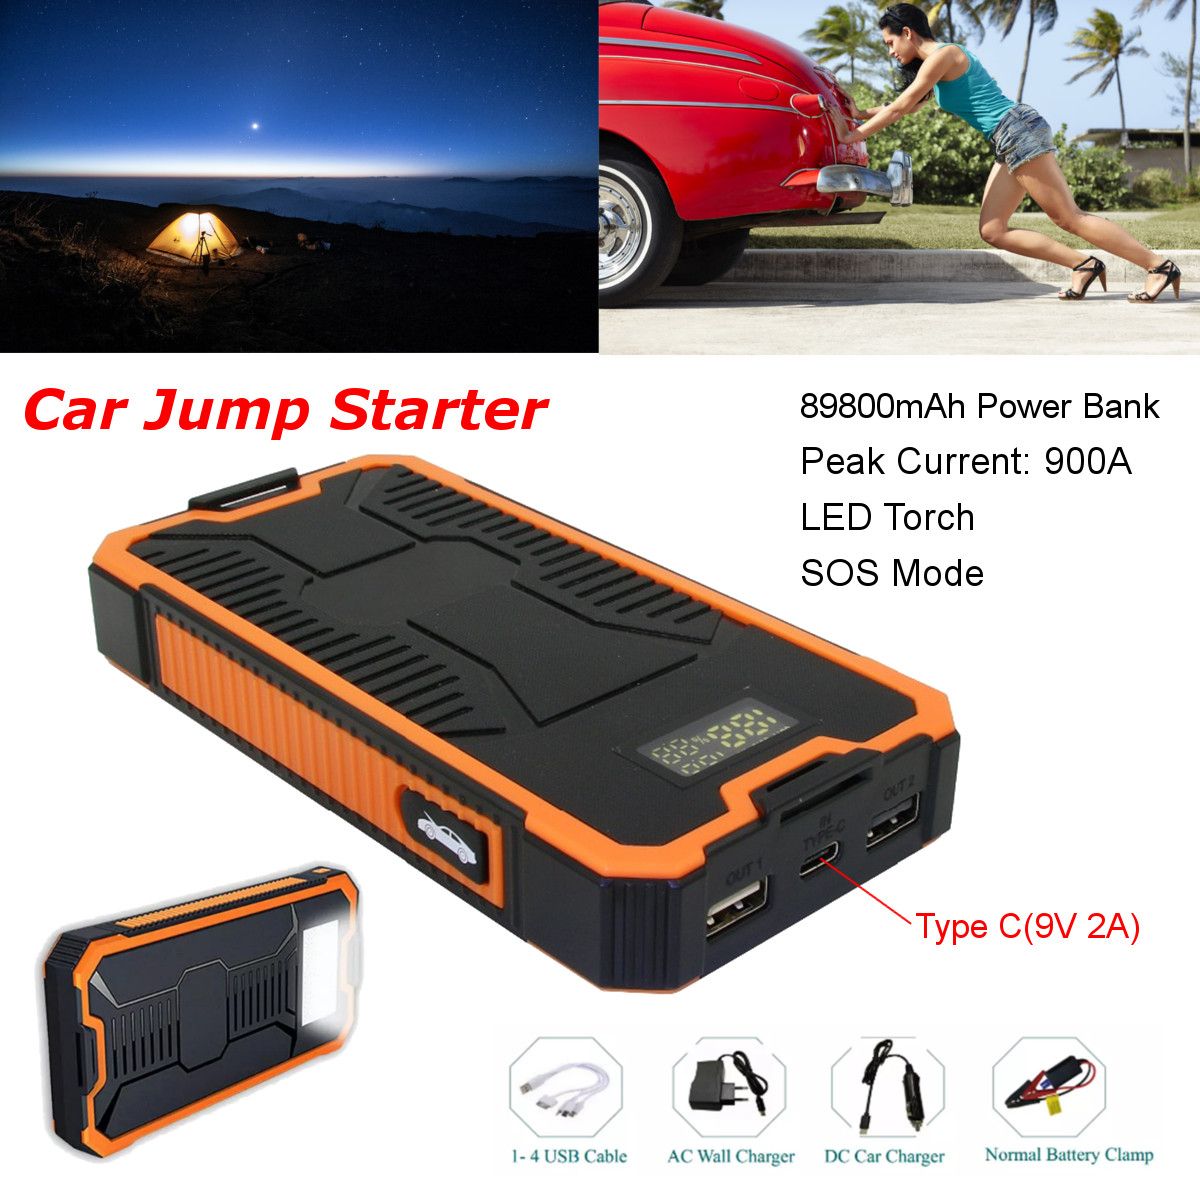 Car-Jump-Starter-Power-Supply-TYPE-C-9V-2A-Fast-Charger-Dual-USB-Output-With-Display-1305528